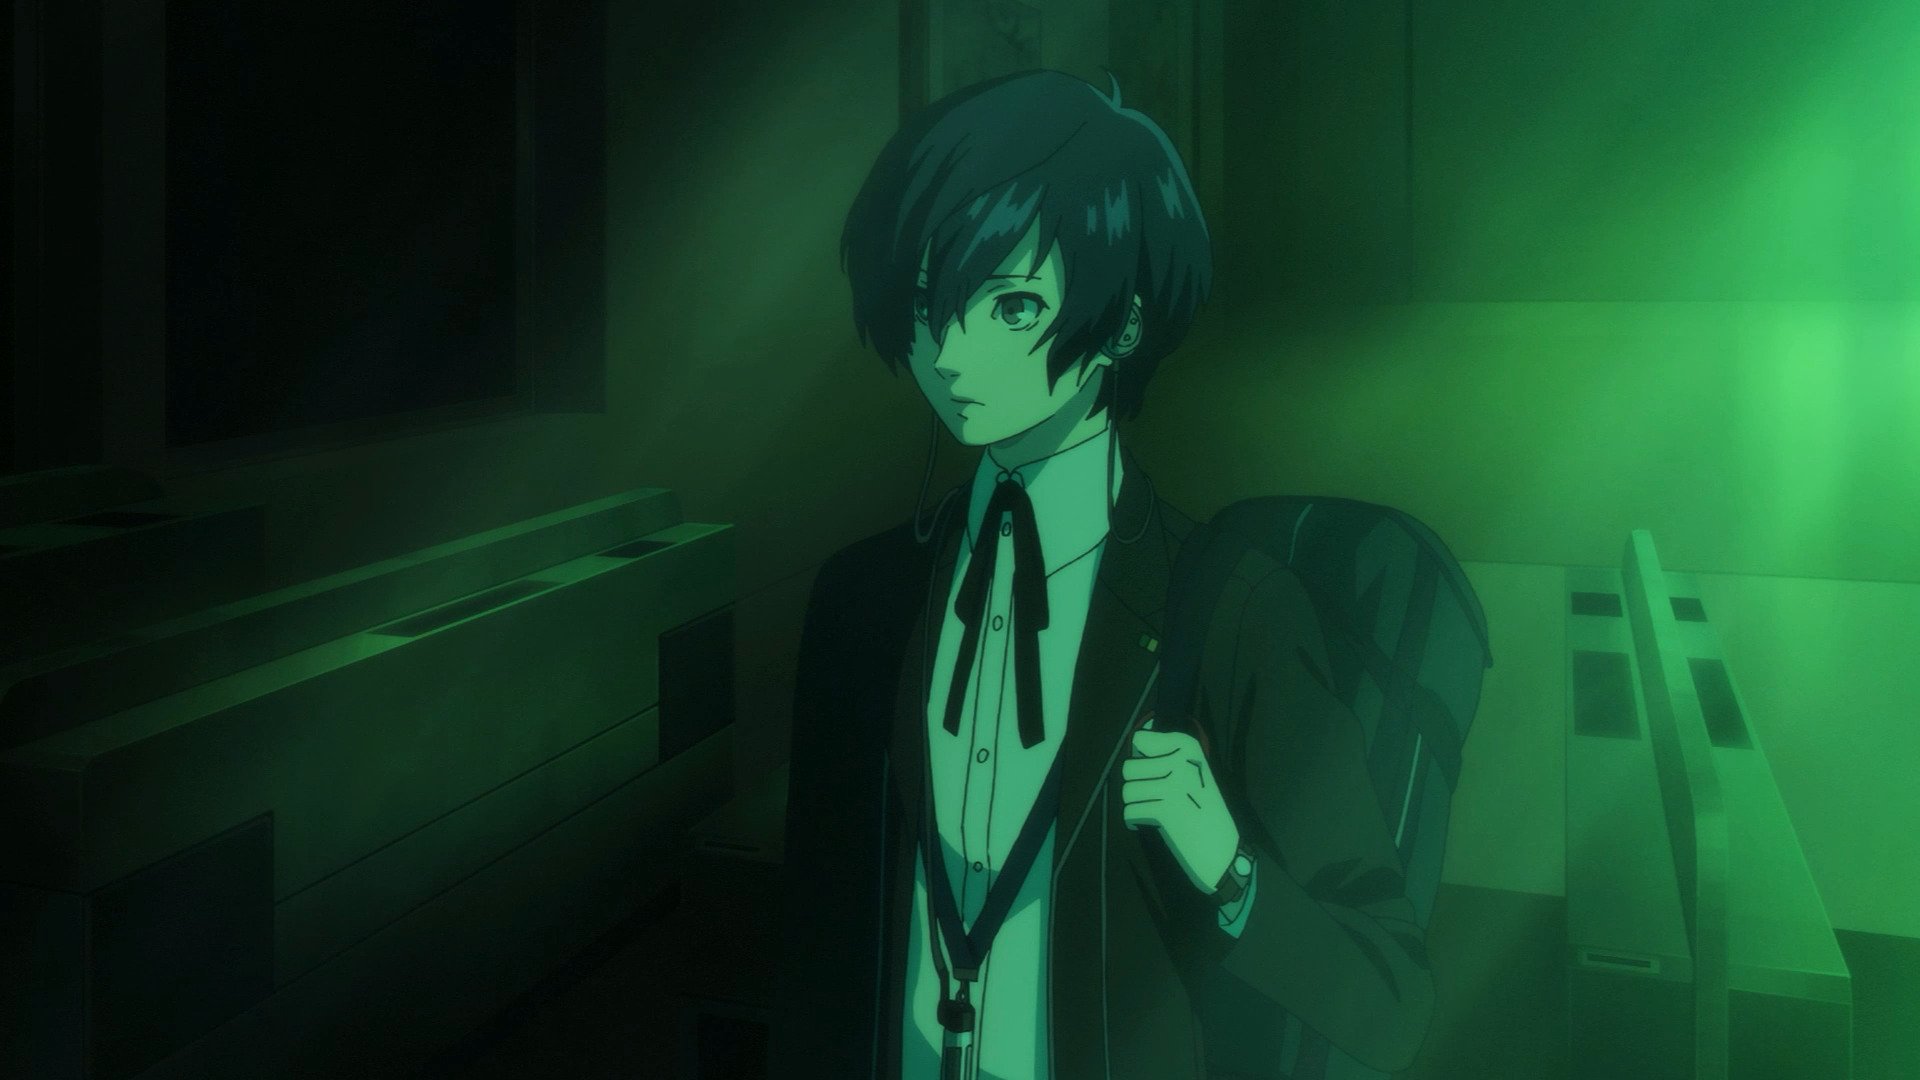 Persona 3 Reload Gameplay Trailer Showcases Main Cast, Reveals English Voices